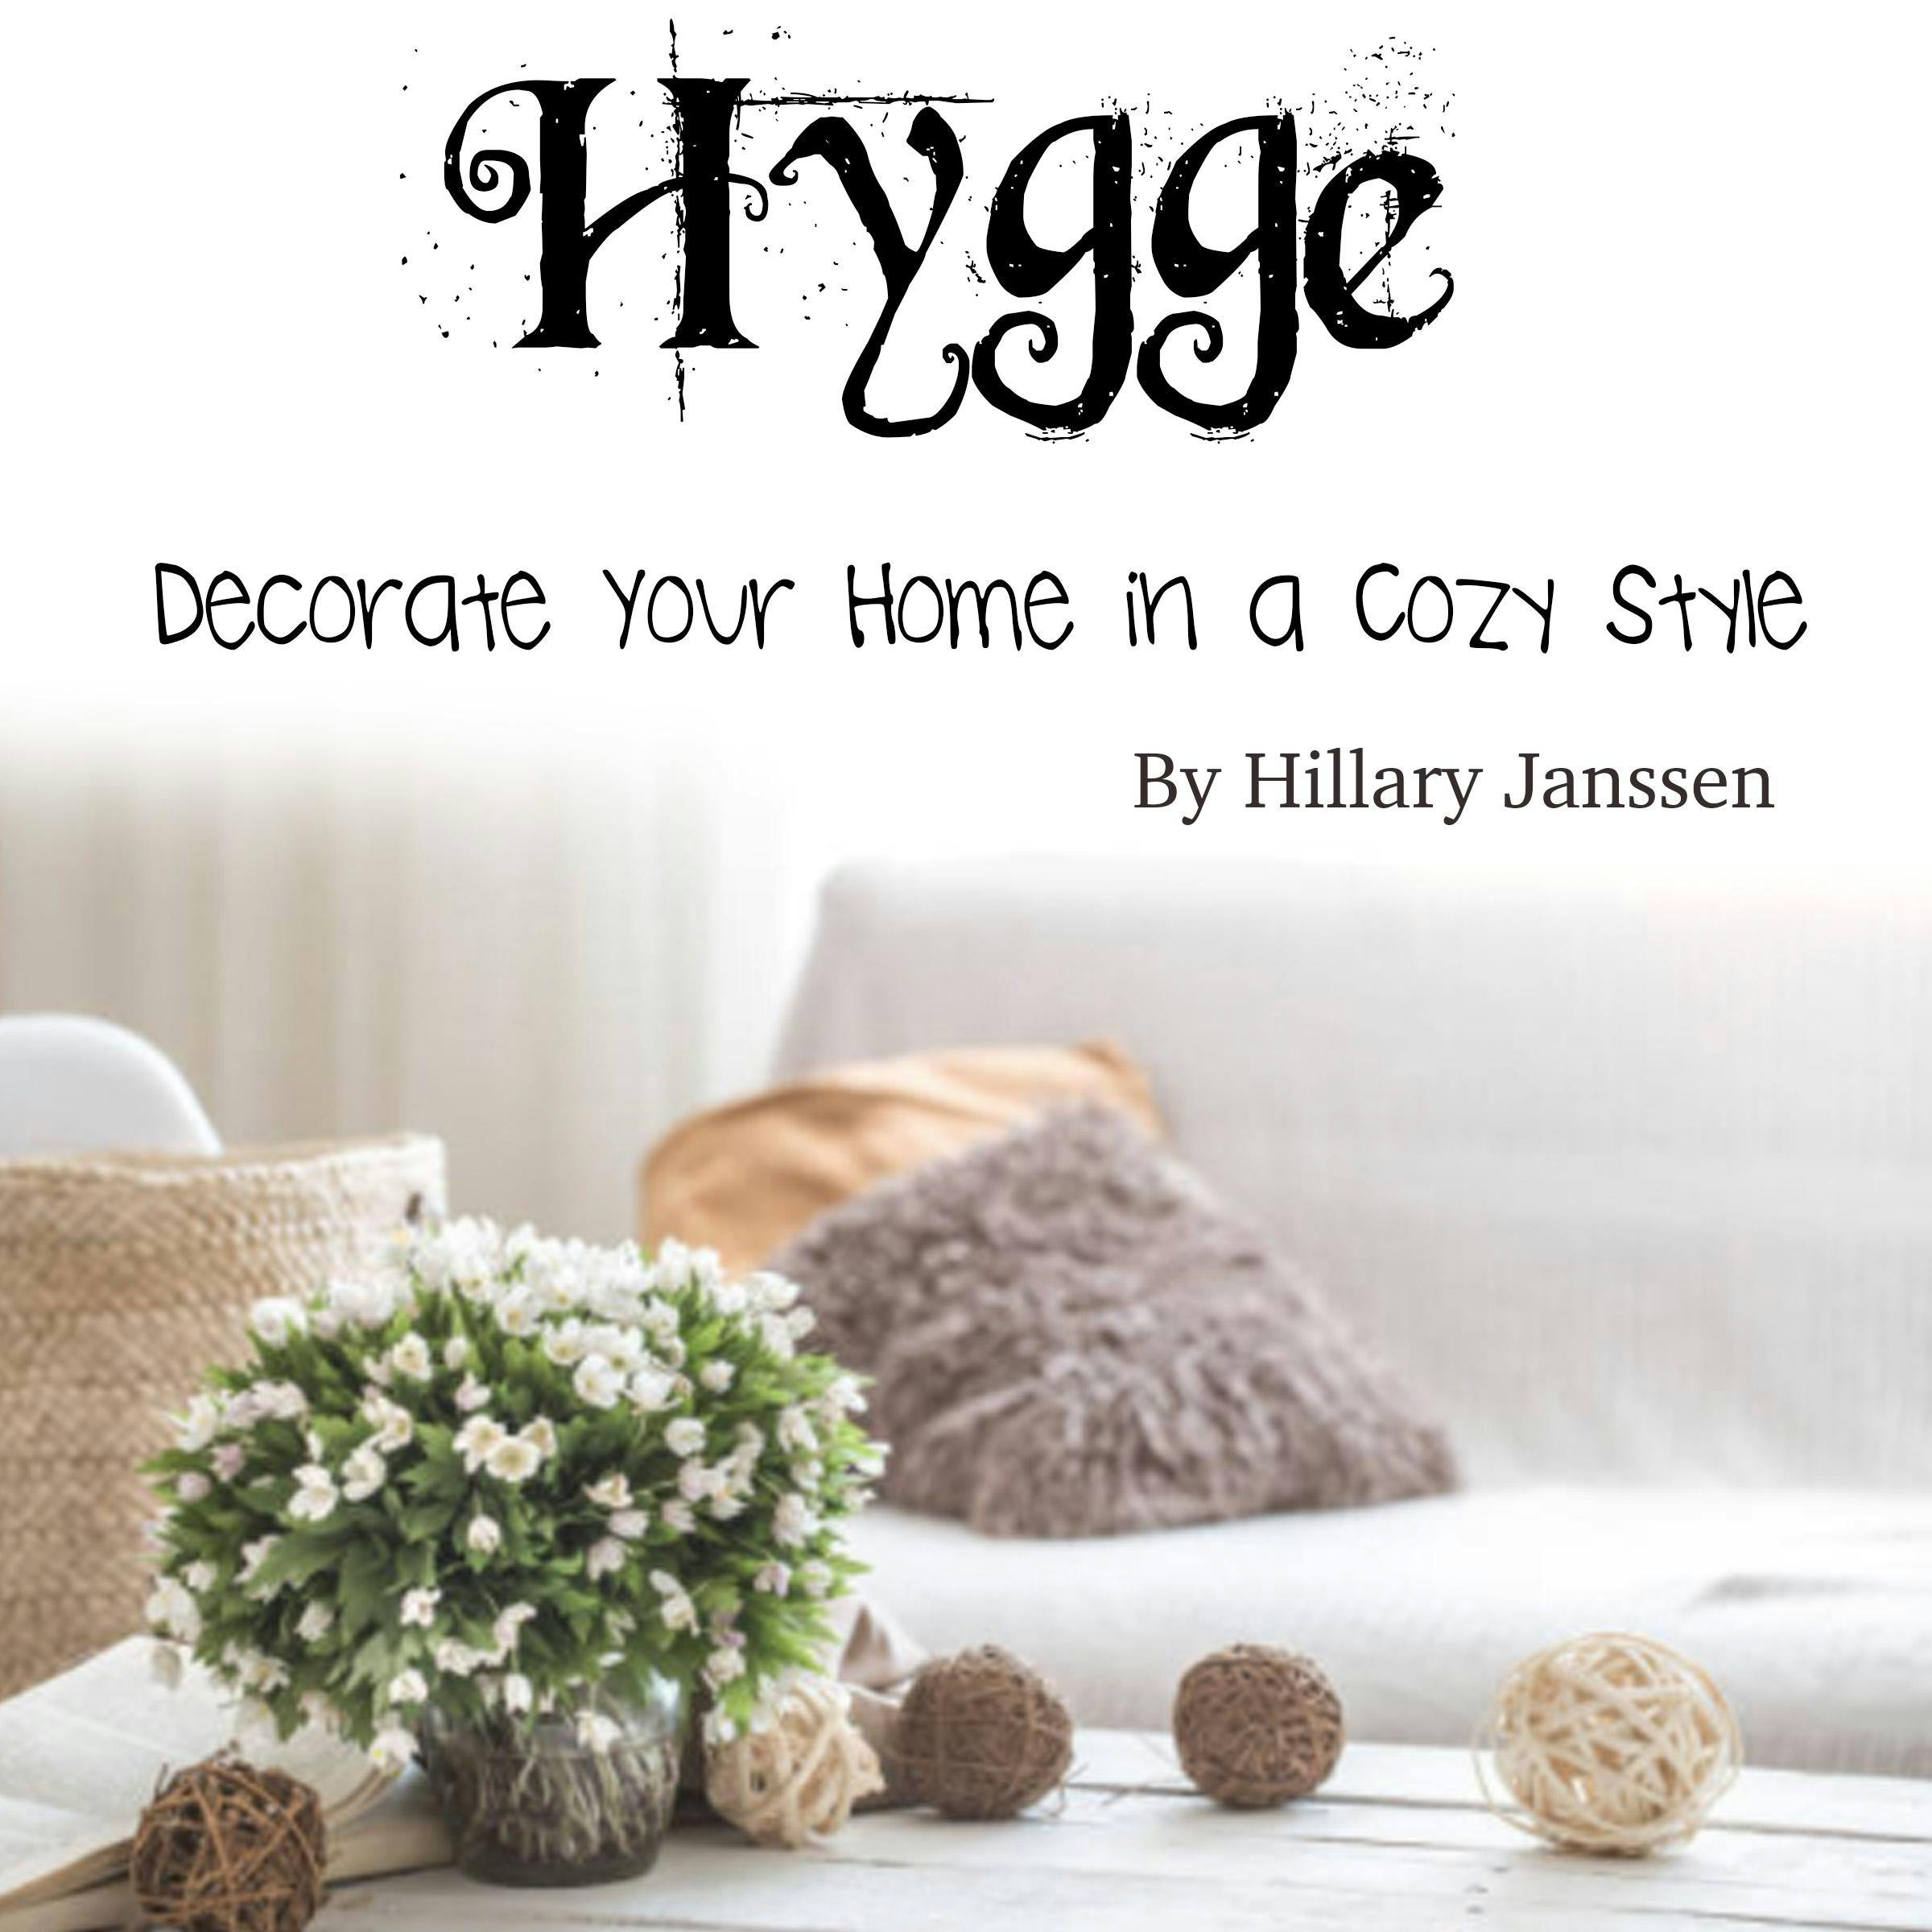 Hygge: Decorate Your Home in a Cozy Style - Hillary Janssen